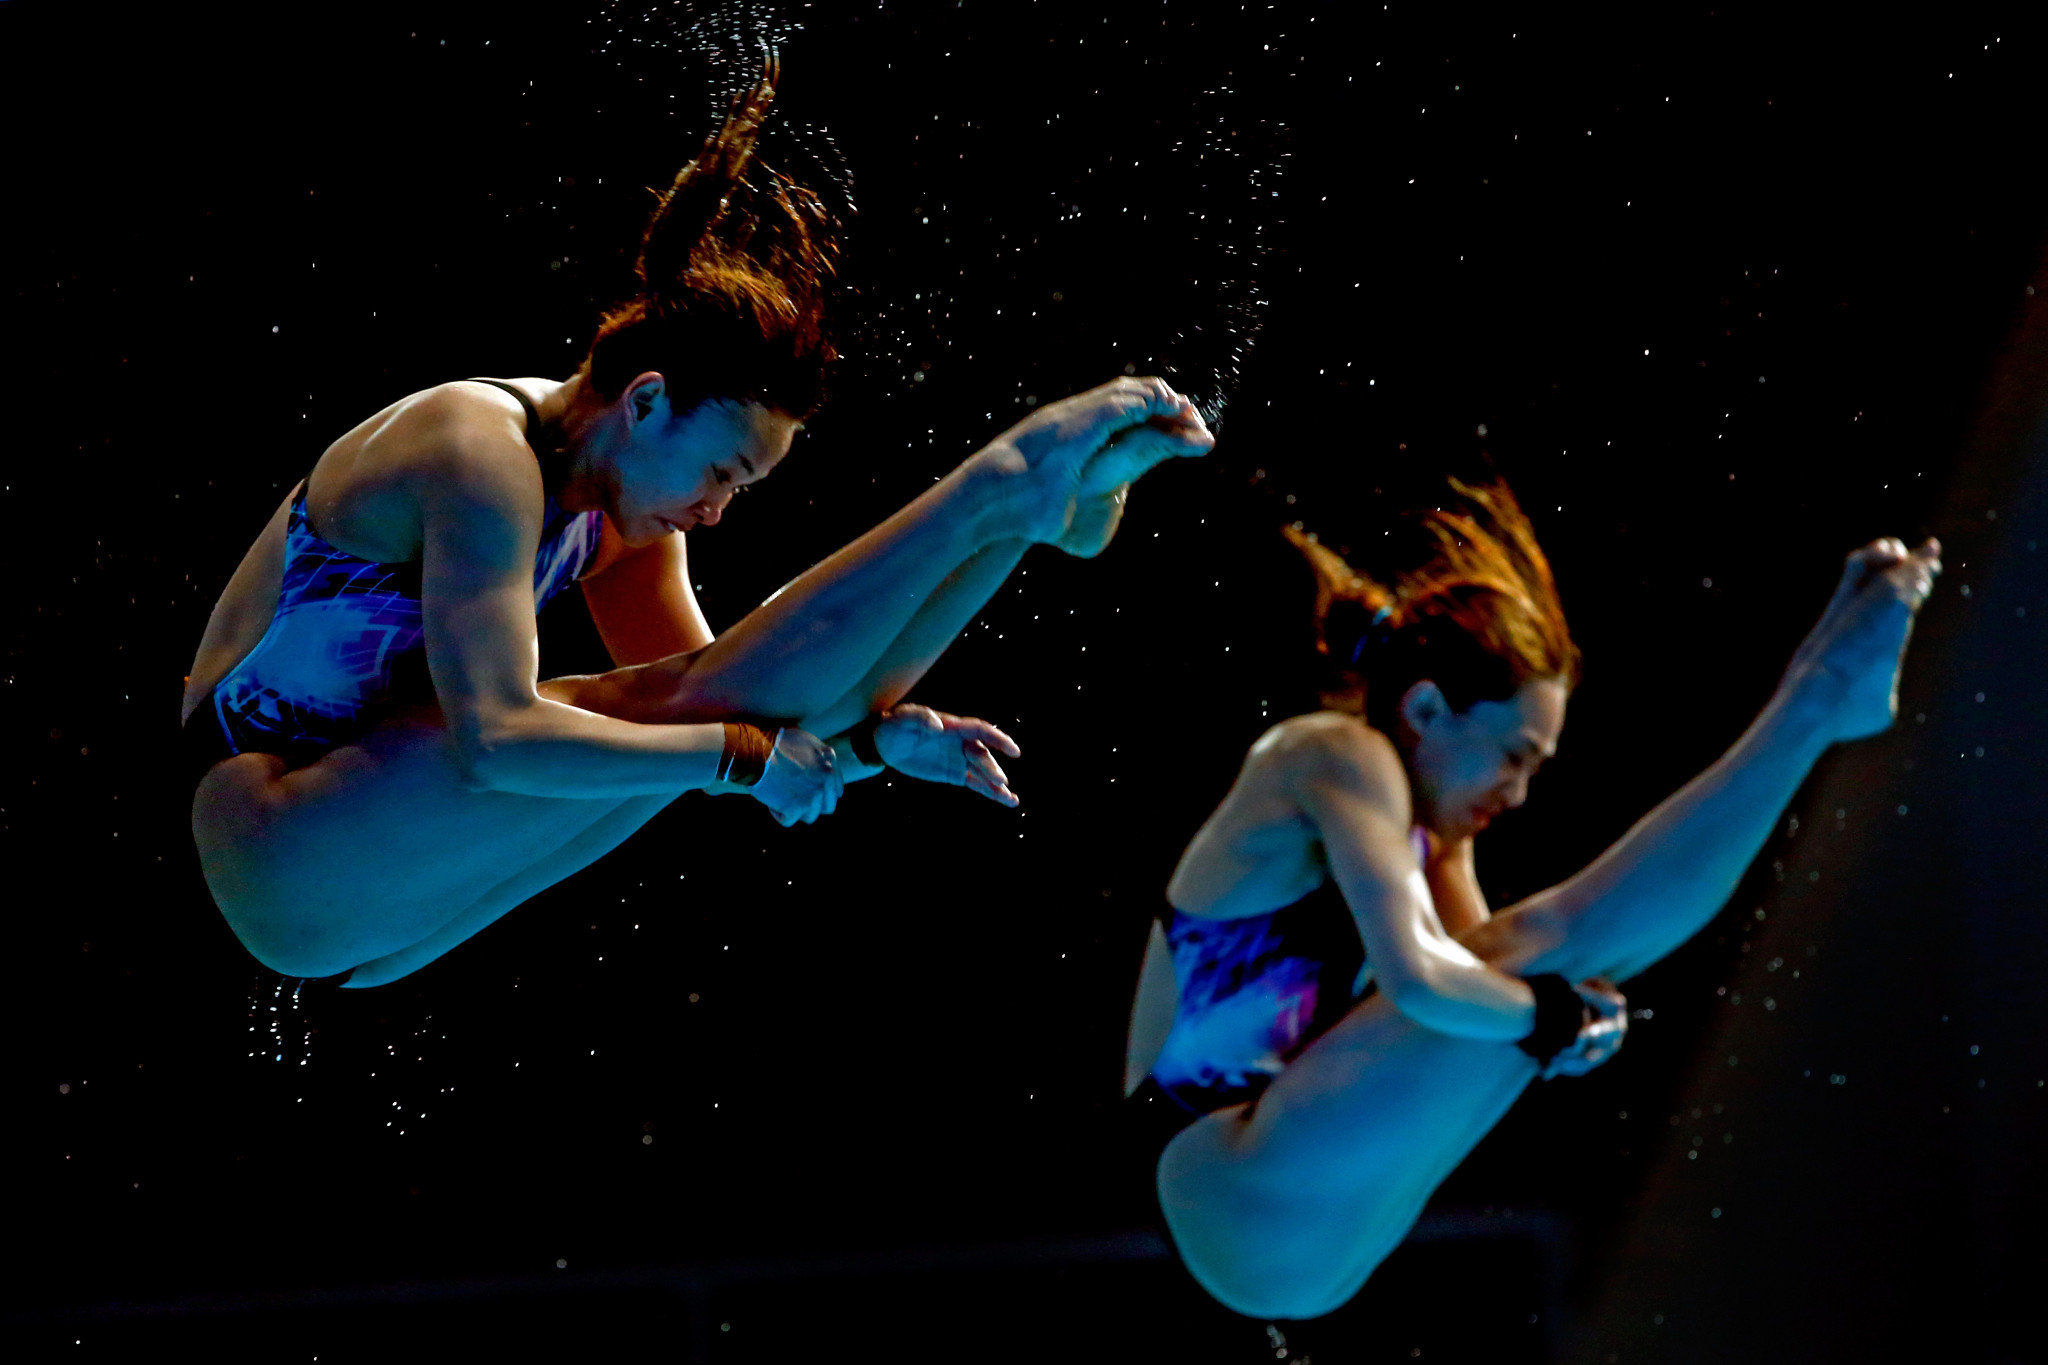 Malaysian pair win home gold on final day of FINA Diving Grand Prix